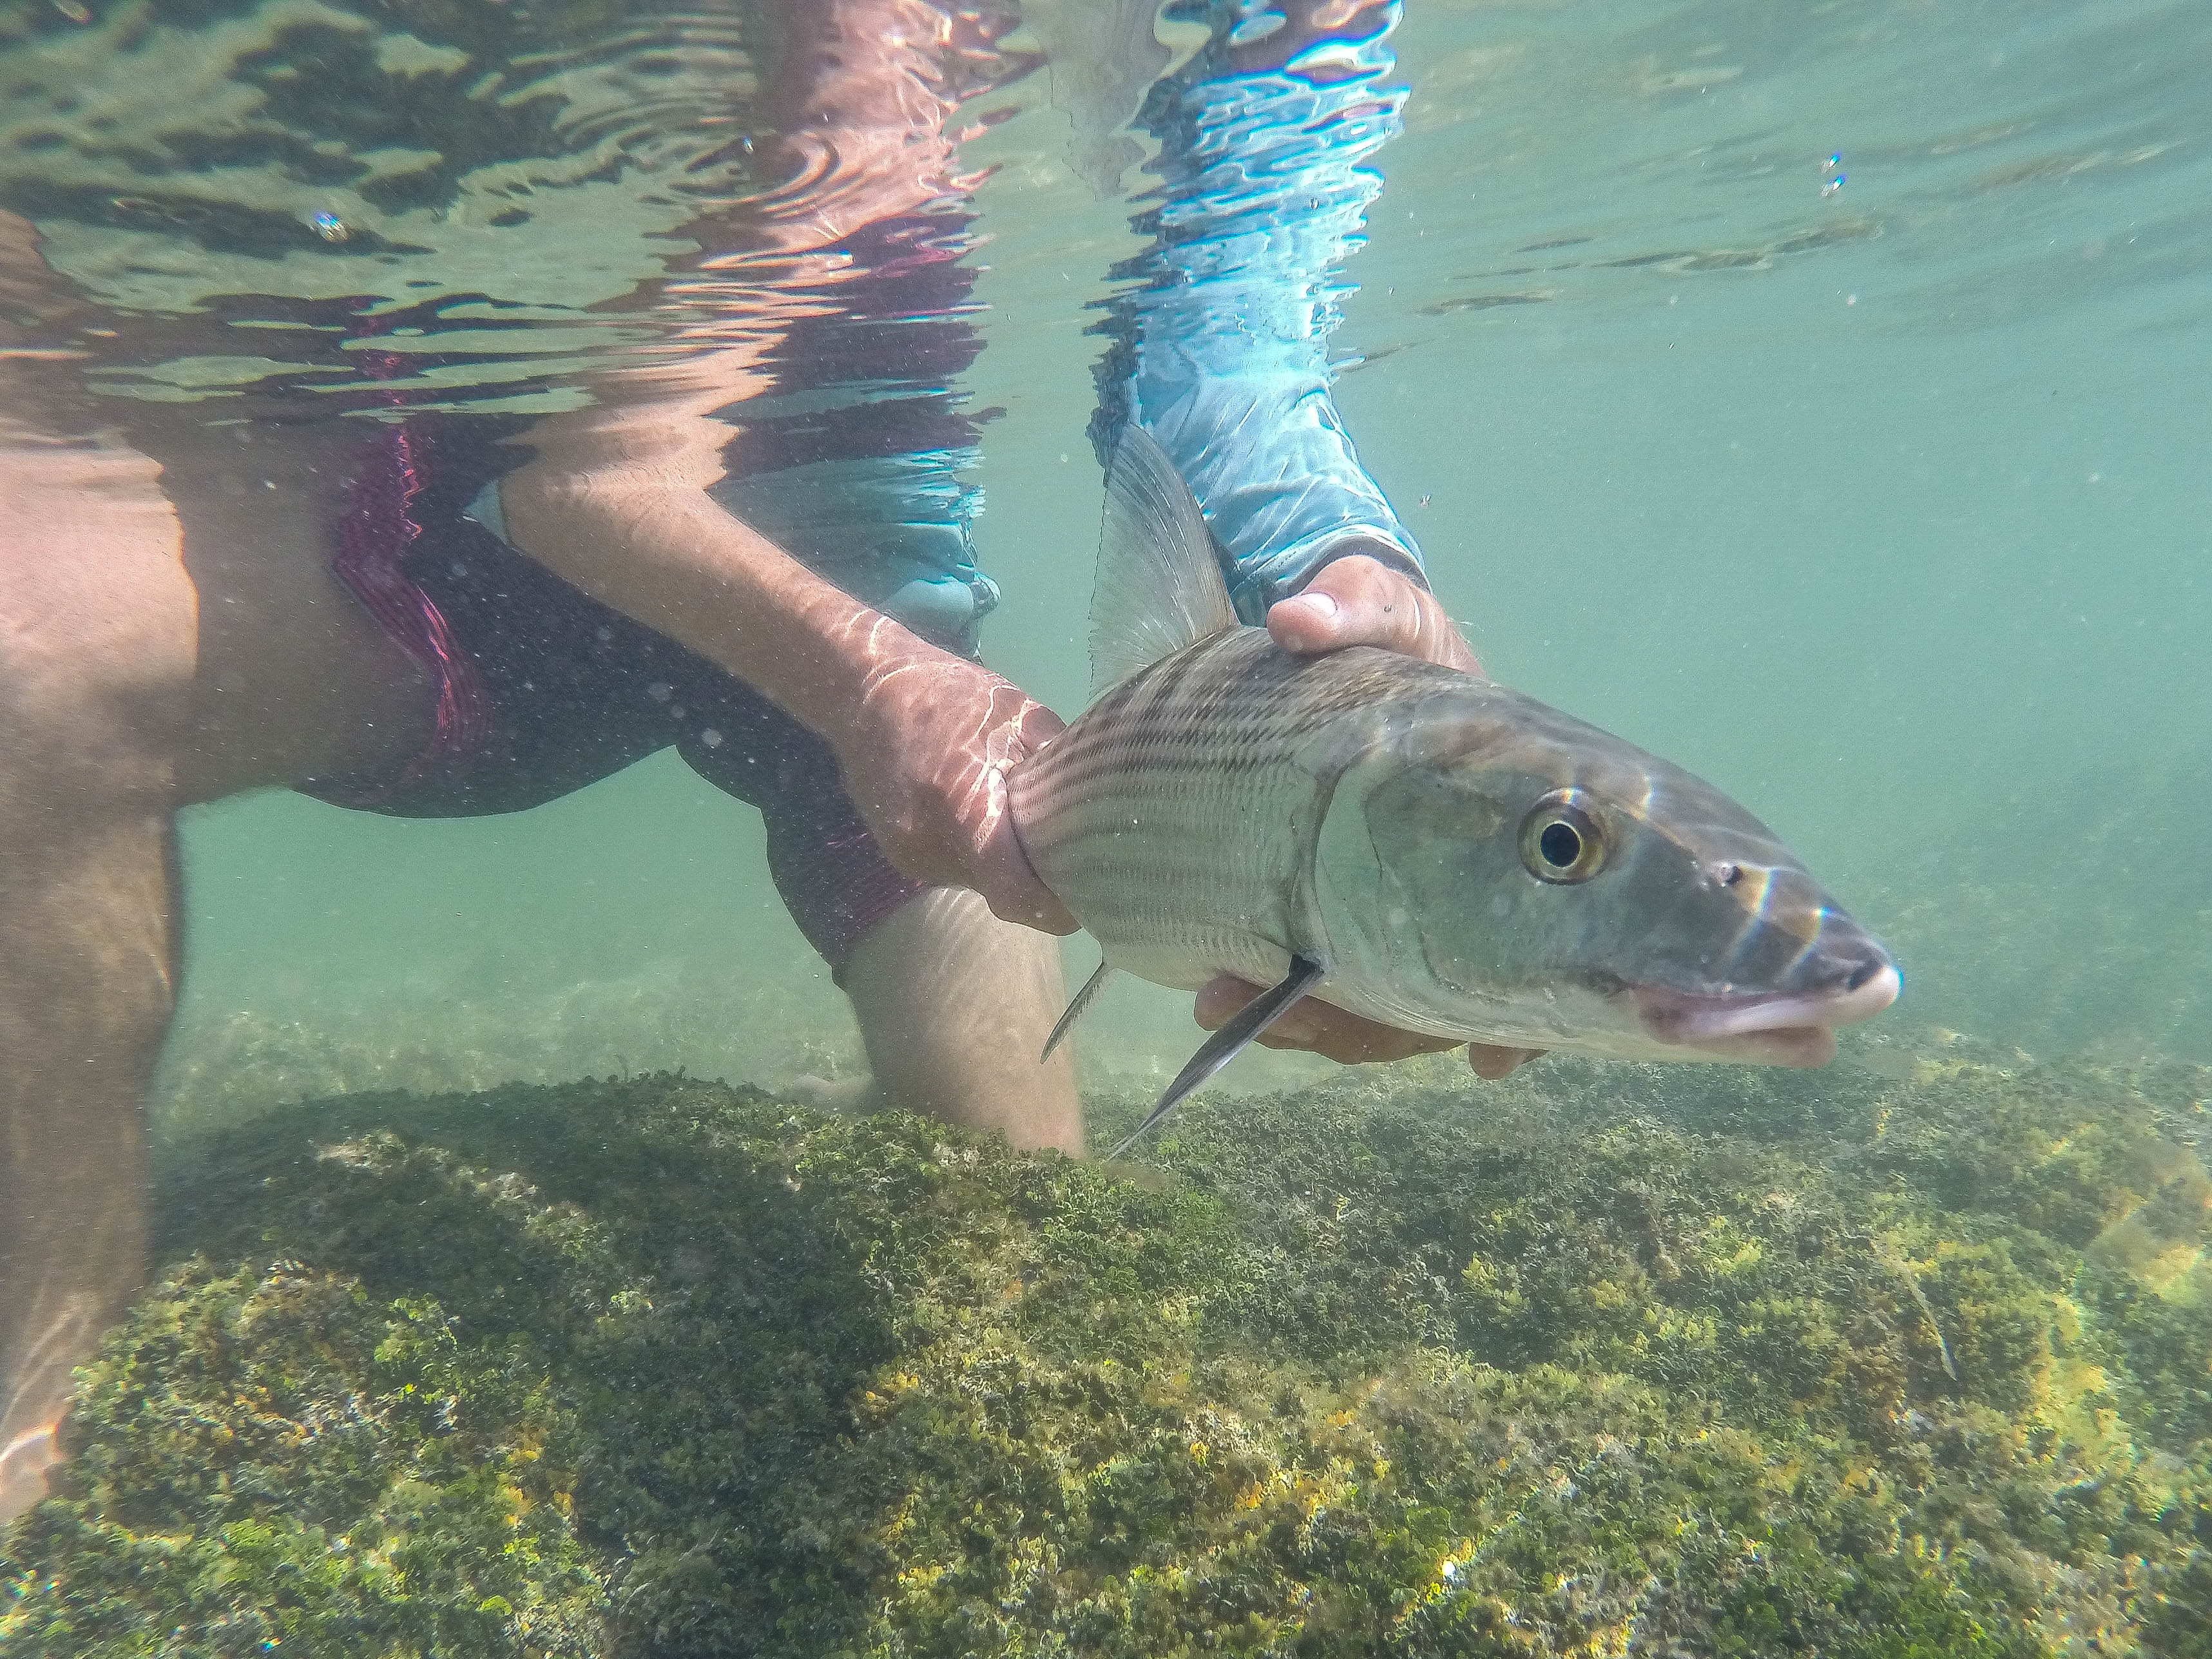 a nice bonefish is being held underwater ready for release